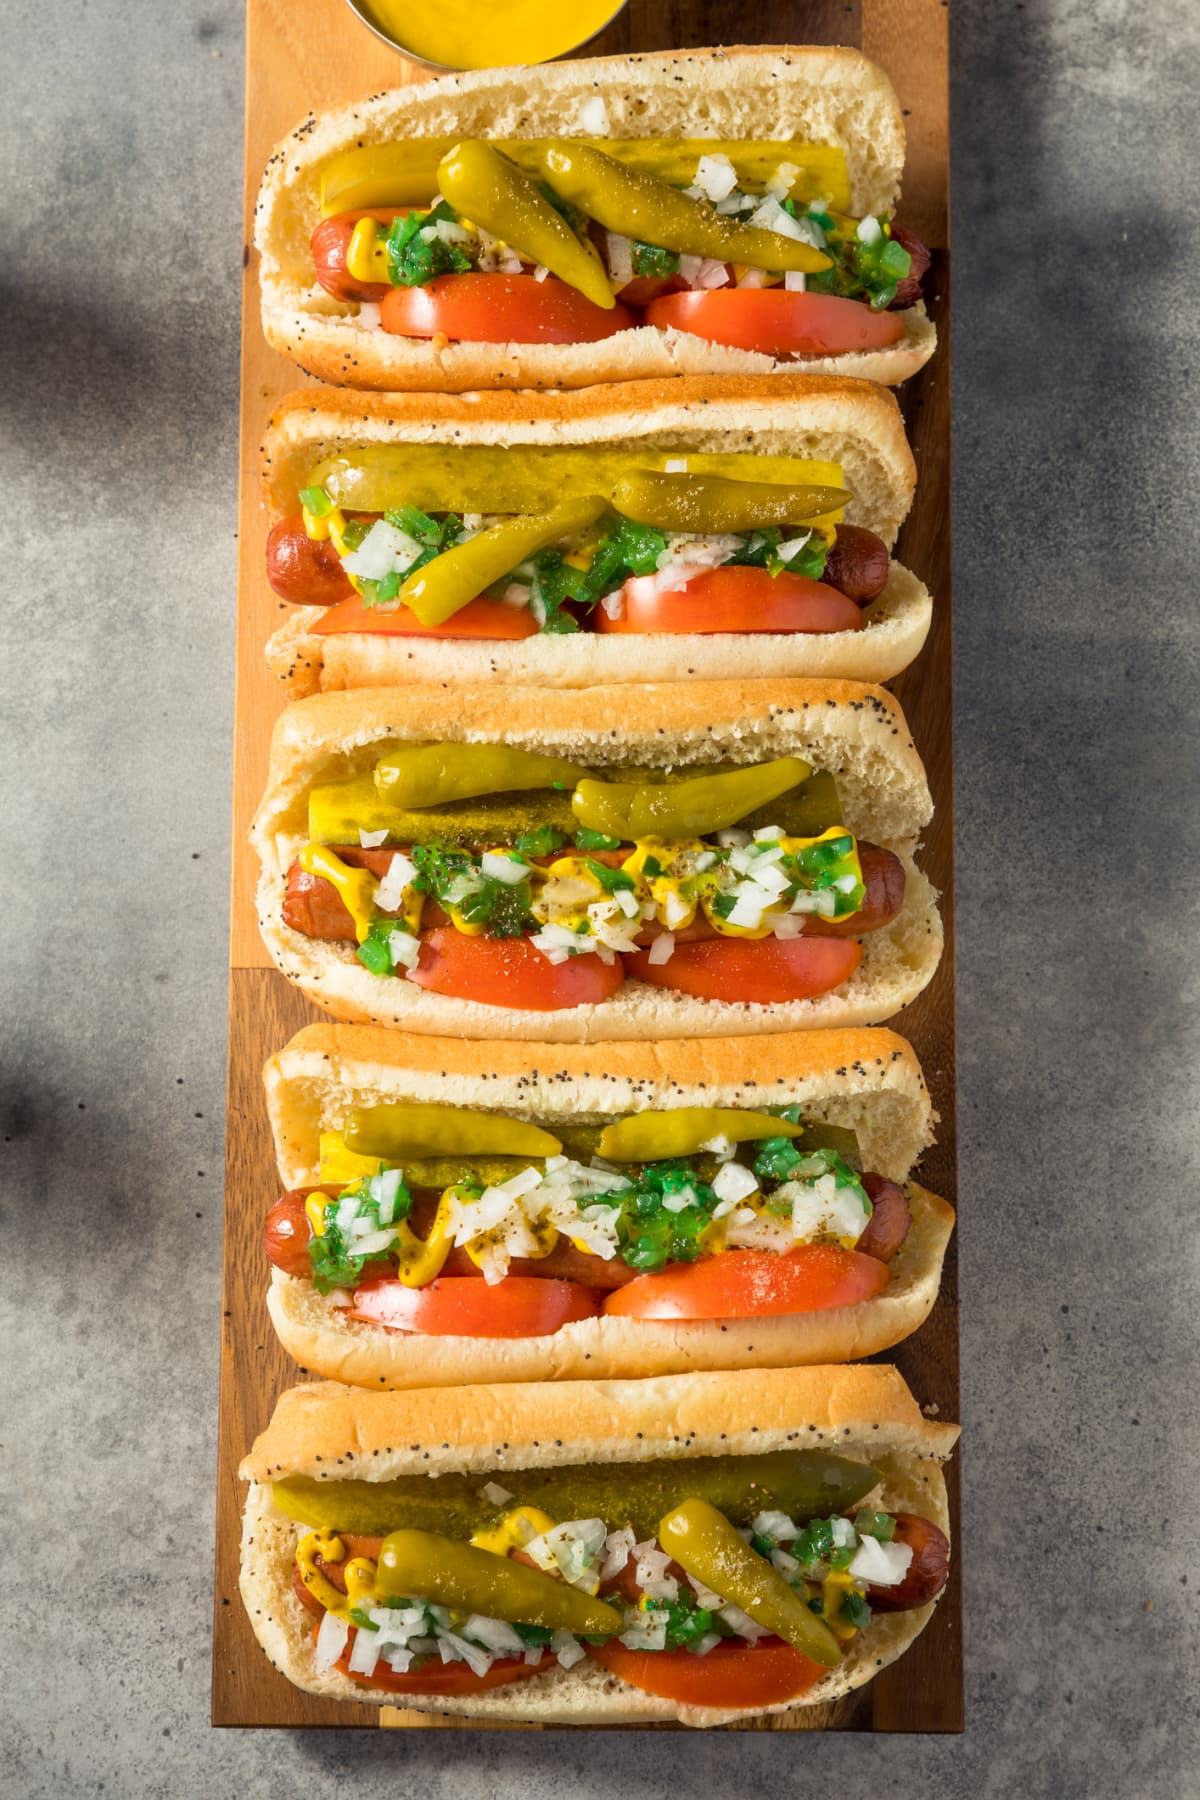 "A Classic Chicago Dog with Fries - The Chicago Dog has a Steamed Poppyseed Bun, Fresh Tomatoes, Diced Onions, Neon Green Relish, Peppers, Pickle, Yellow Mustard and a Dash of Celery Salt- Photographed on Hasselblad H3D2-39mb Camera"